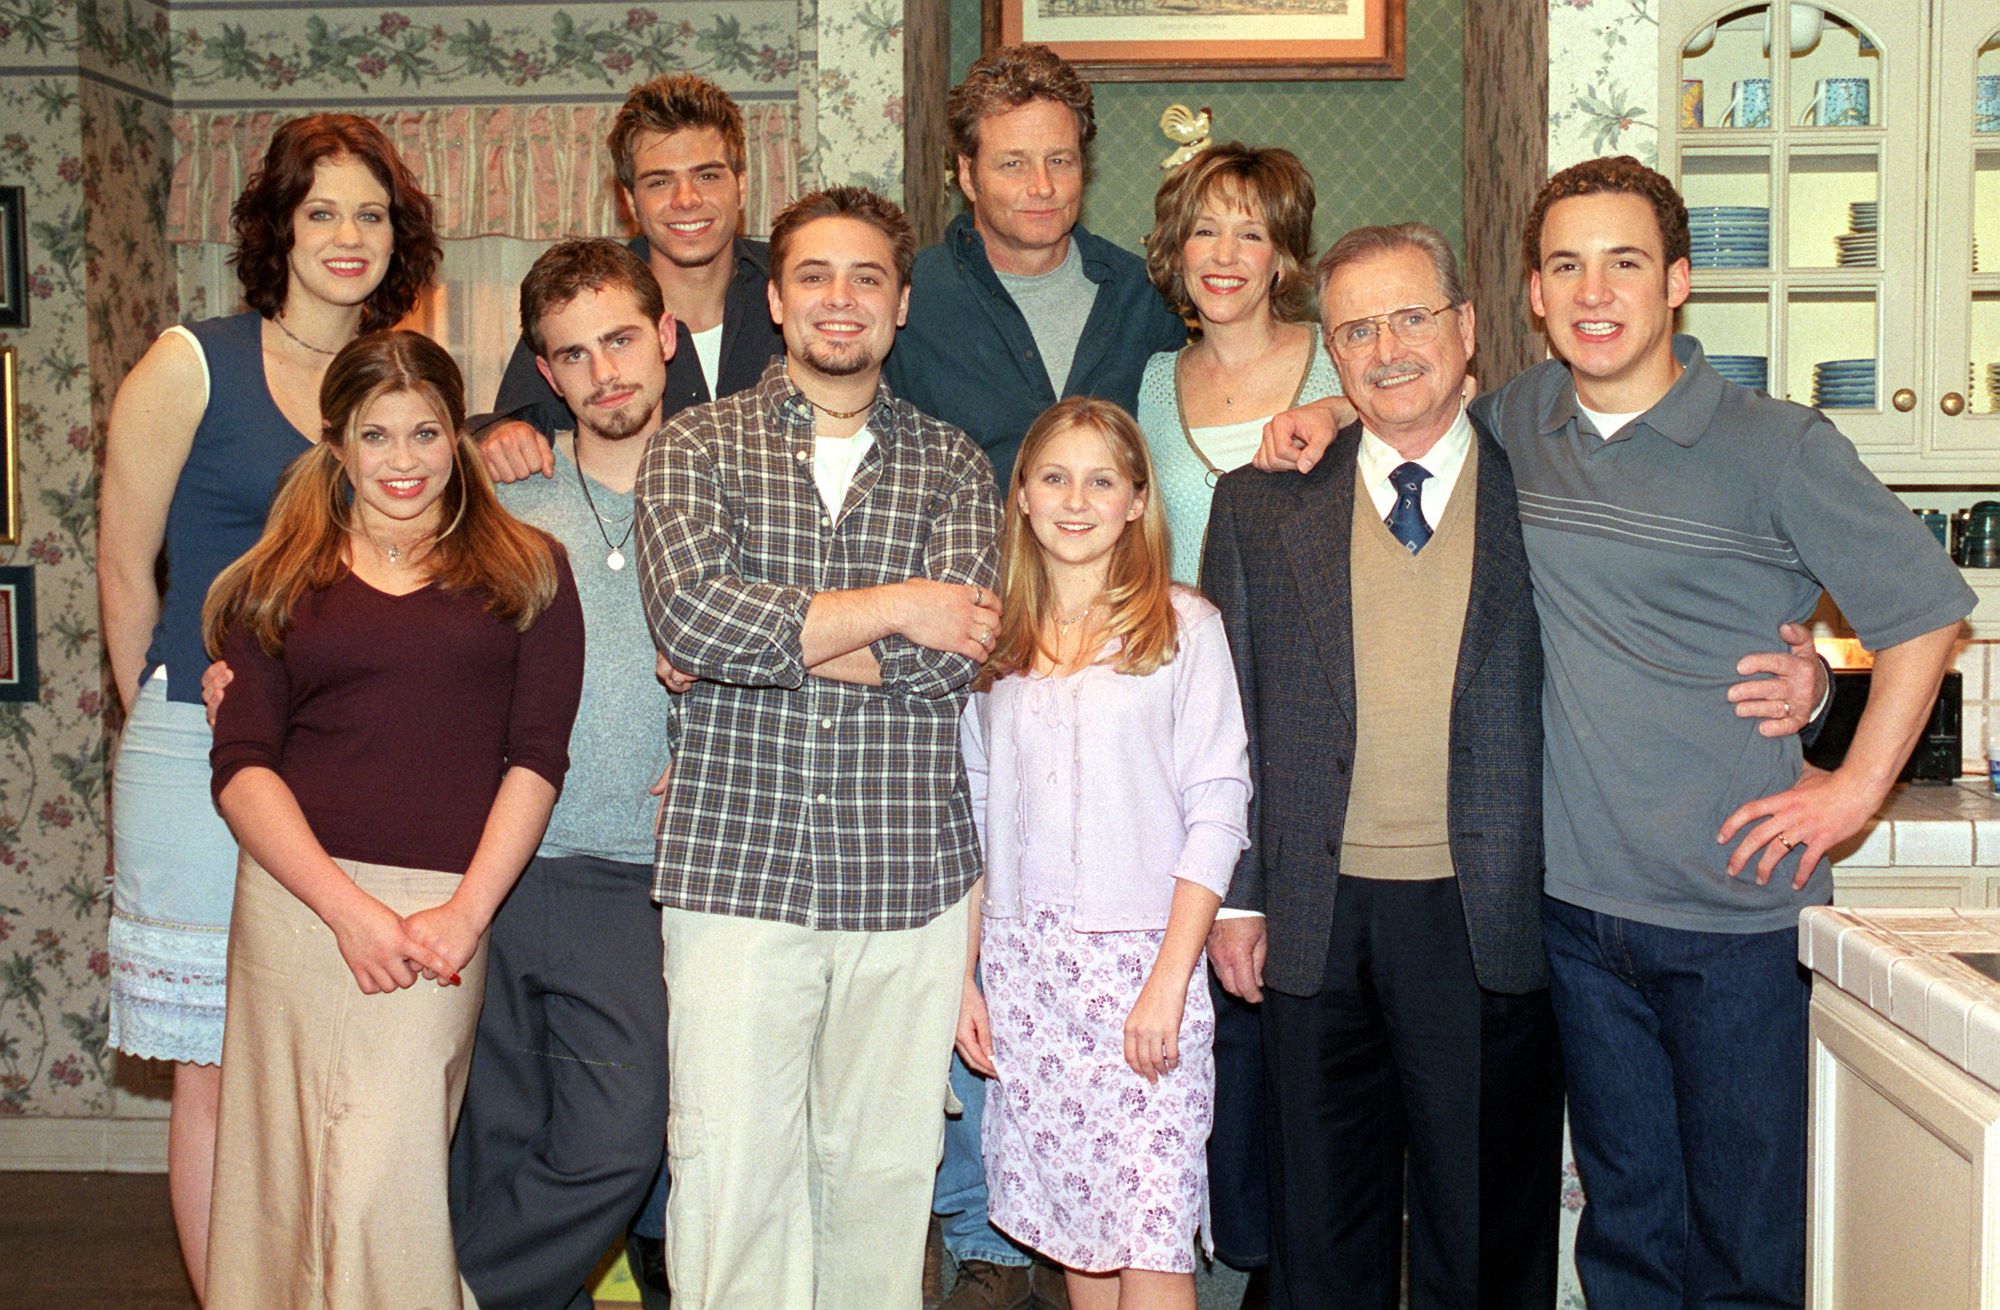 The 'Boy Meets World' cast posing for a photo after filming the finale